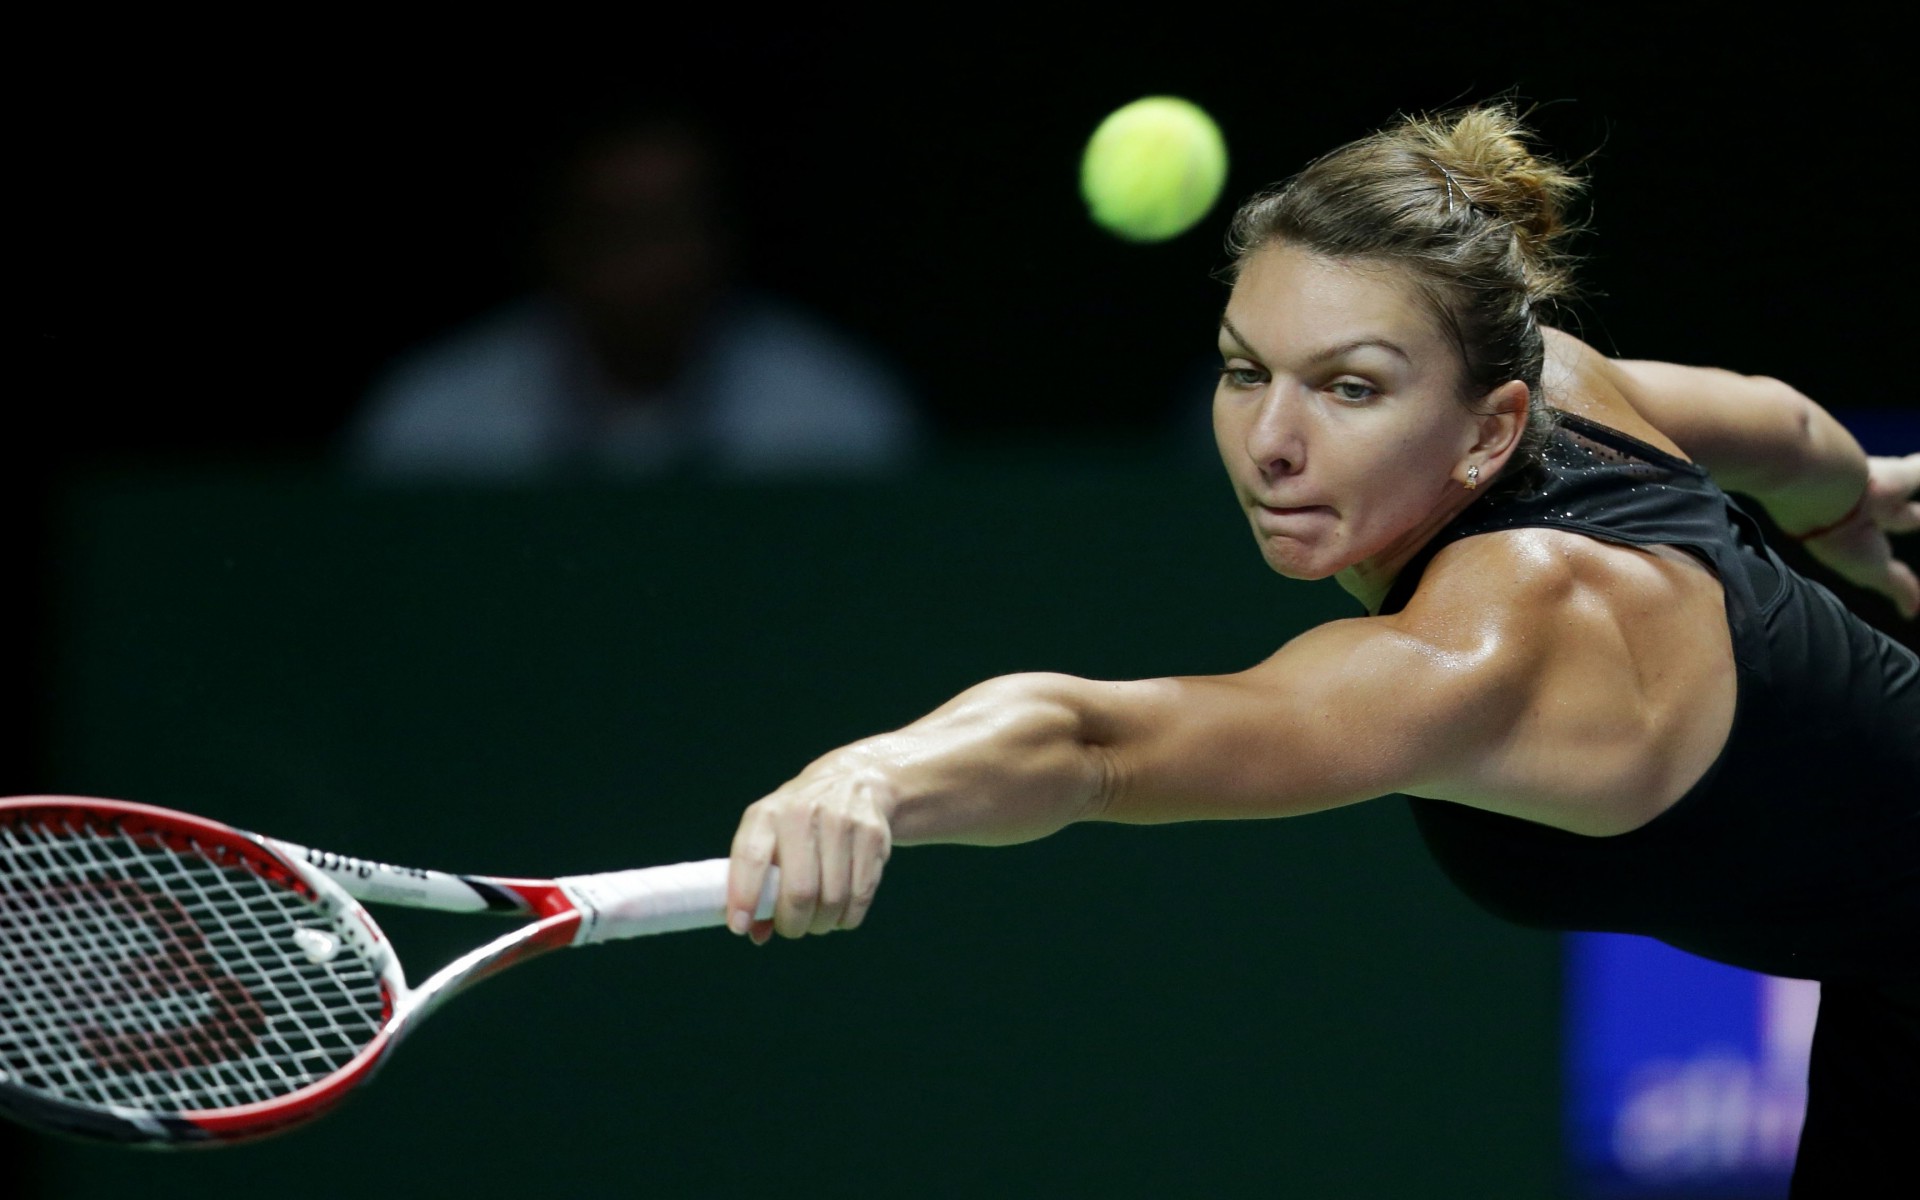 simona halep tennis player download hd picture